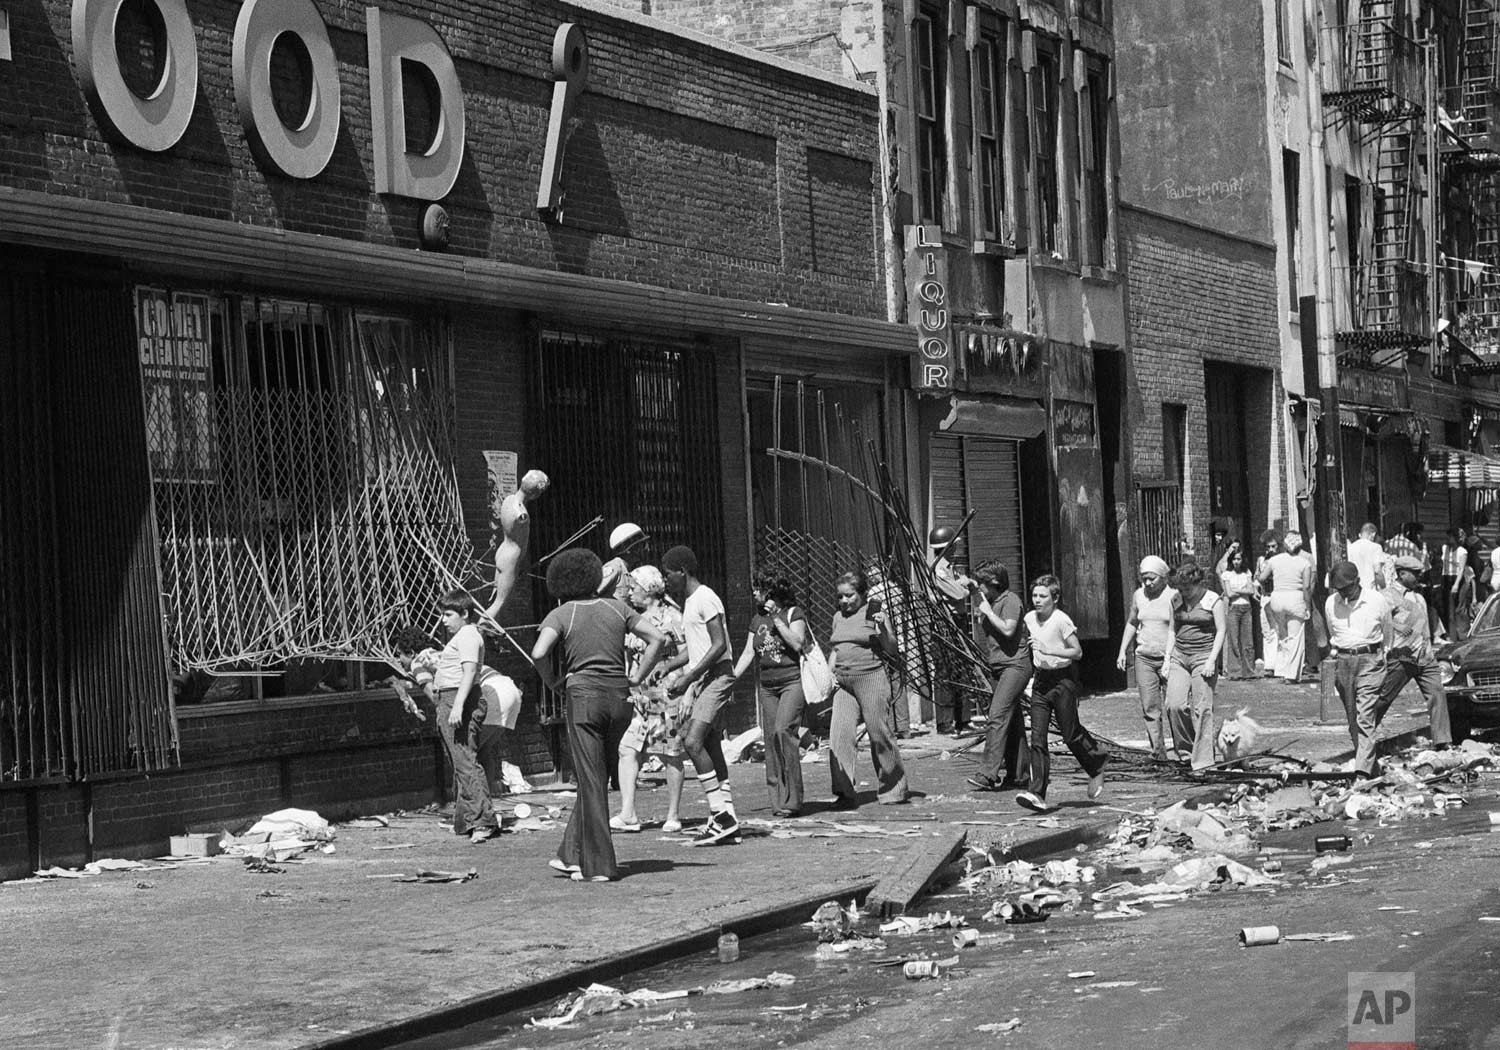  People peer into a looted store on 110th Street at Lexington Ave. in Manhattan the day after the power failure in New York, July 14, 1977.  (AP Photo) 